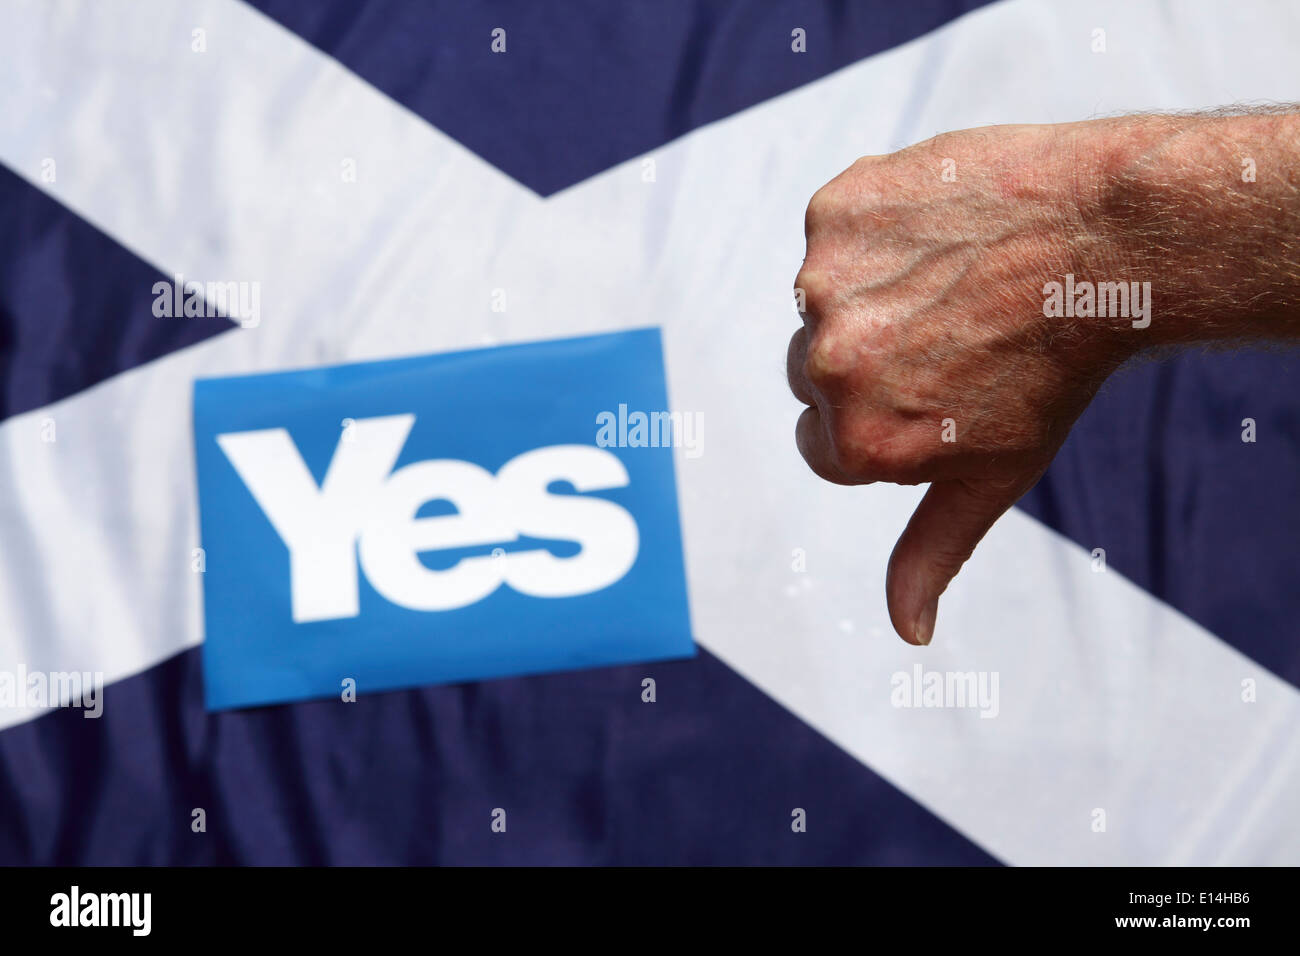 A thumbs down sign in front of a Scottish Saltire flag and a yes sign. Stock Photo